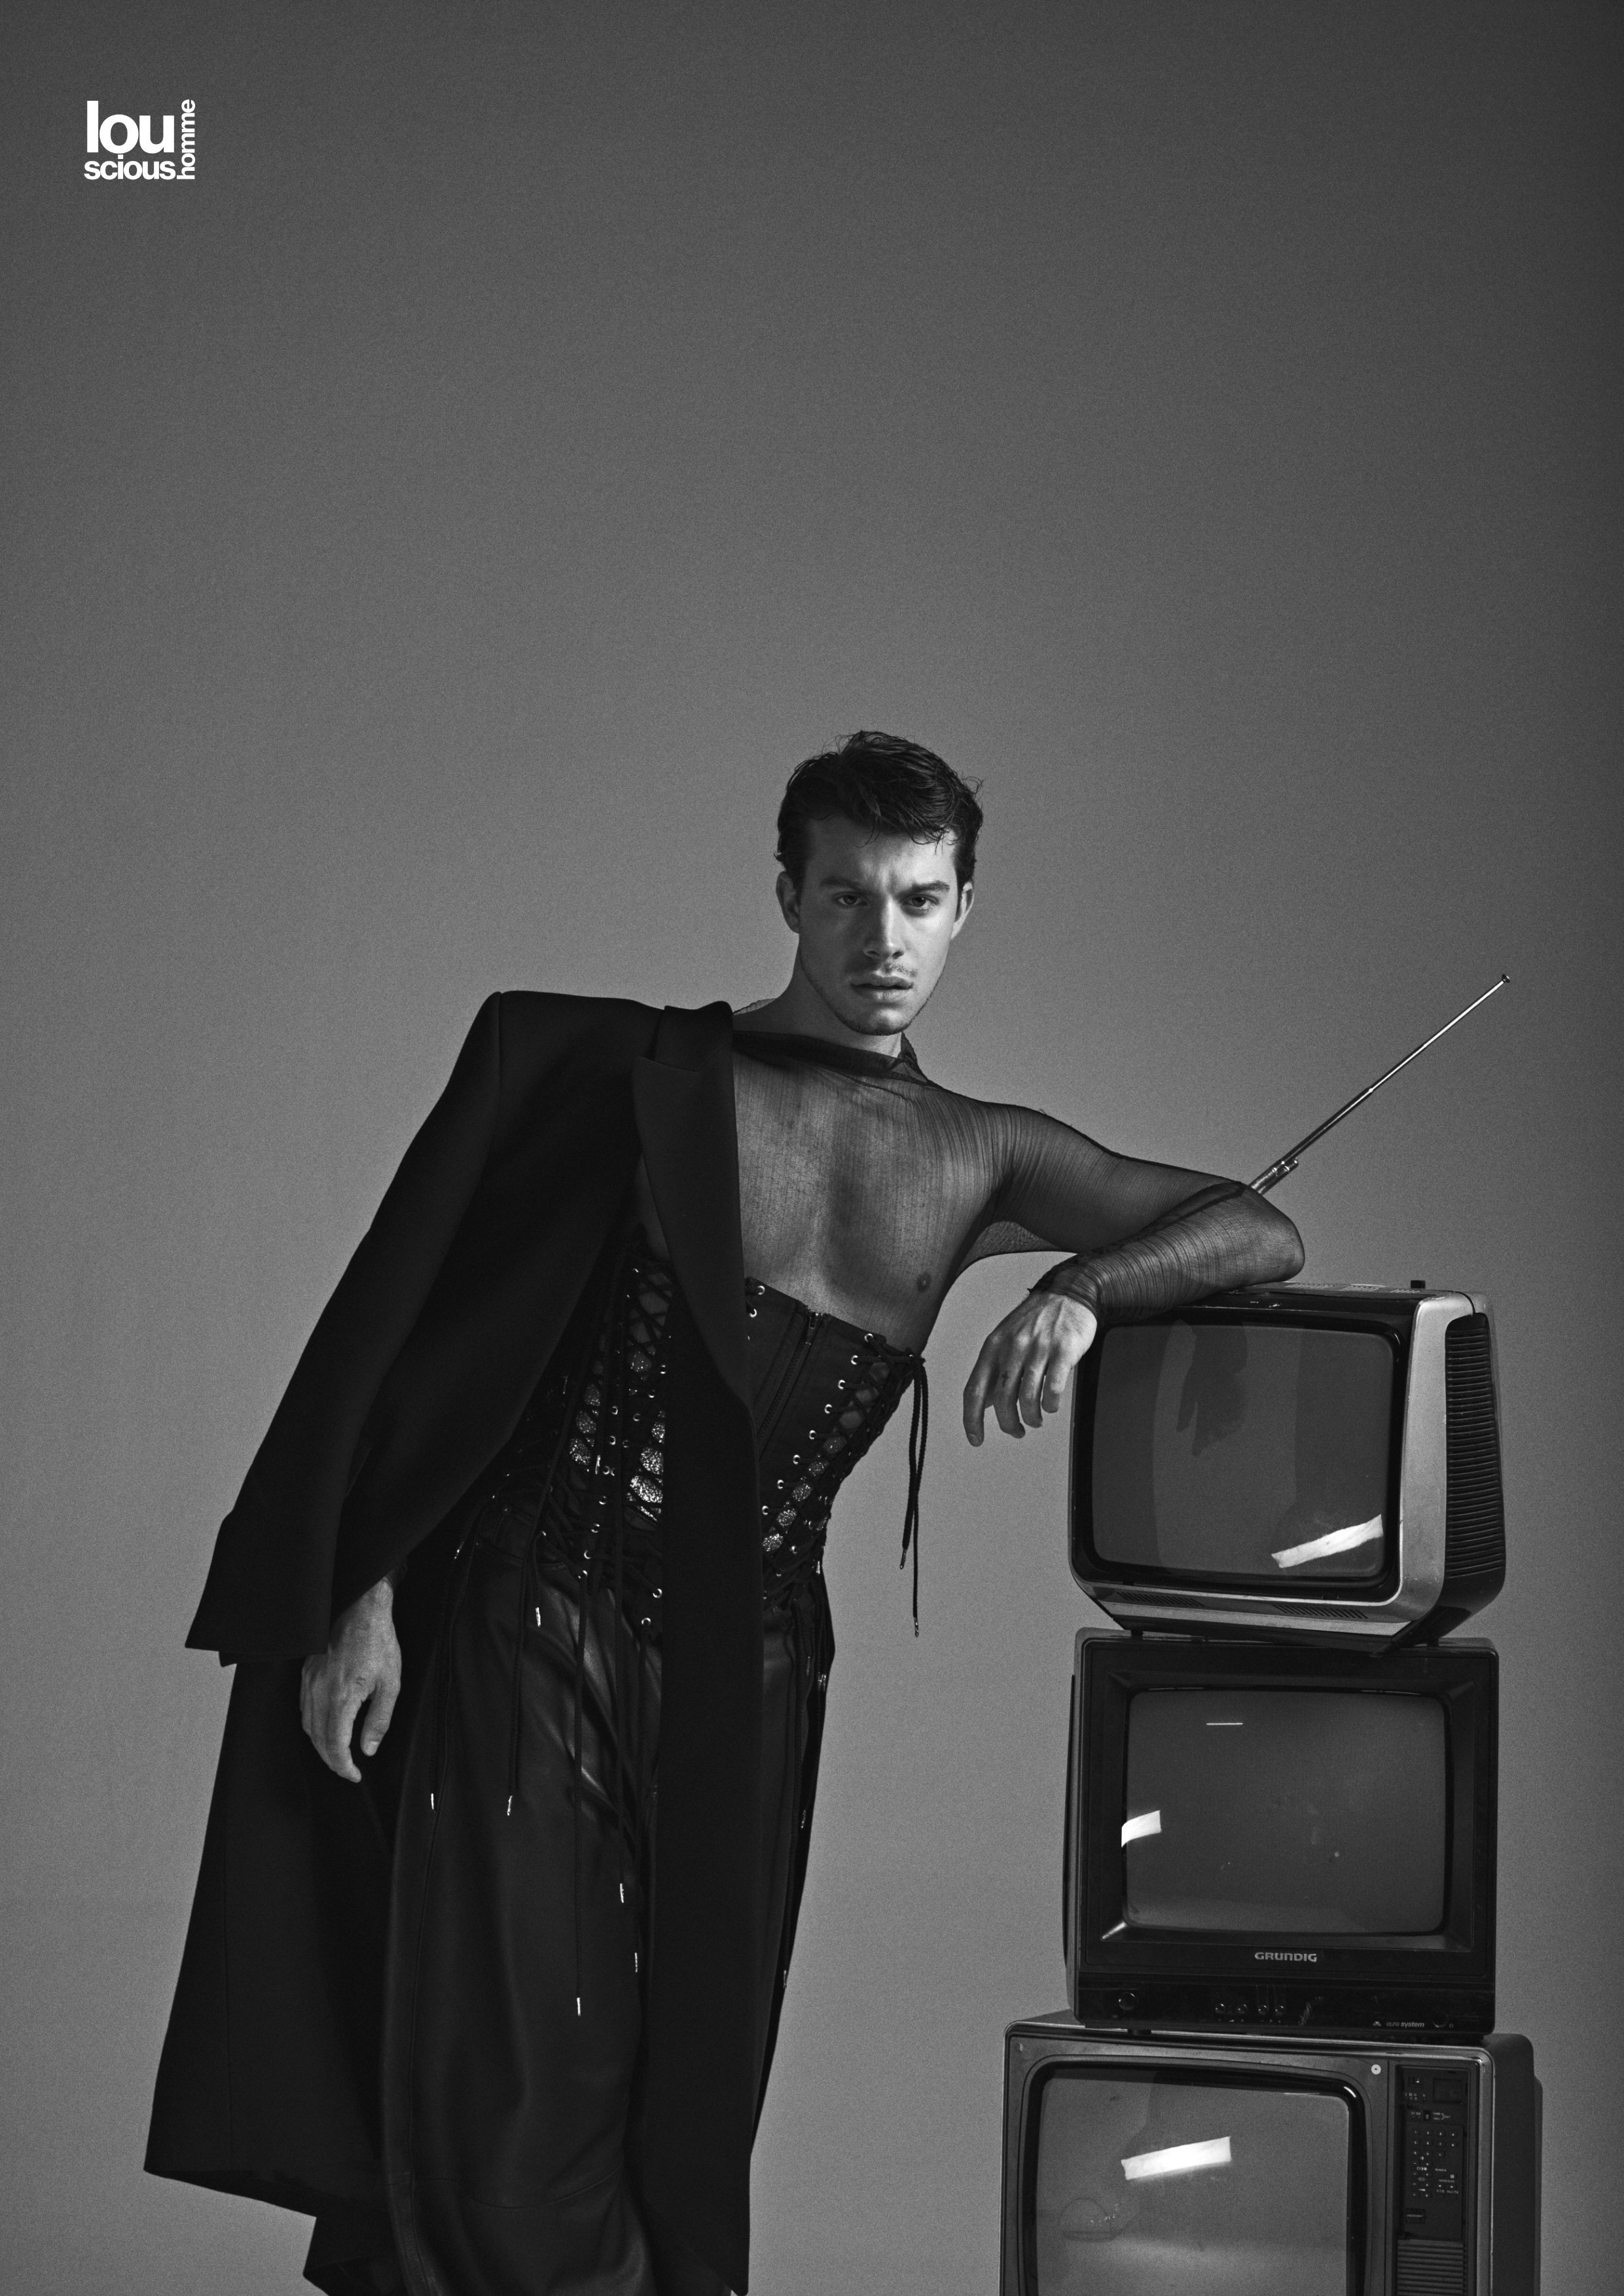 Louscious Homme Online Editorial - Editorial Andrew Matarazzo by Issa Tall_14.jpg